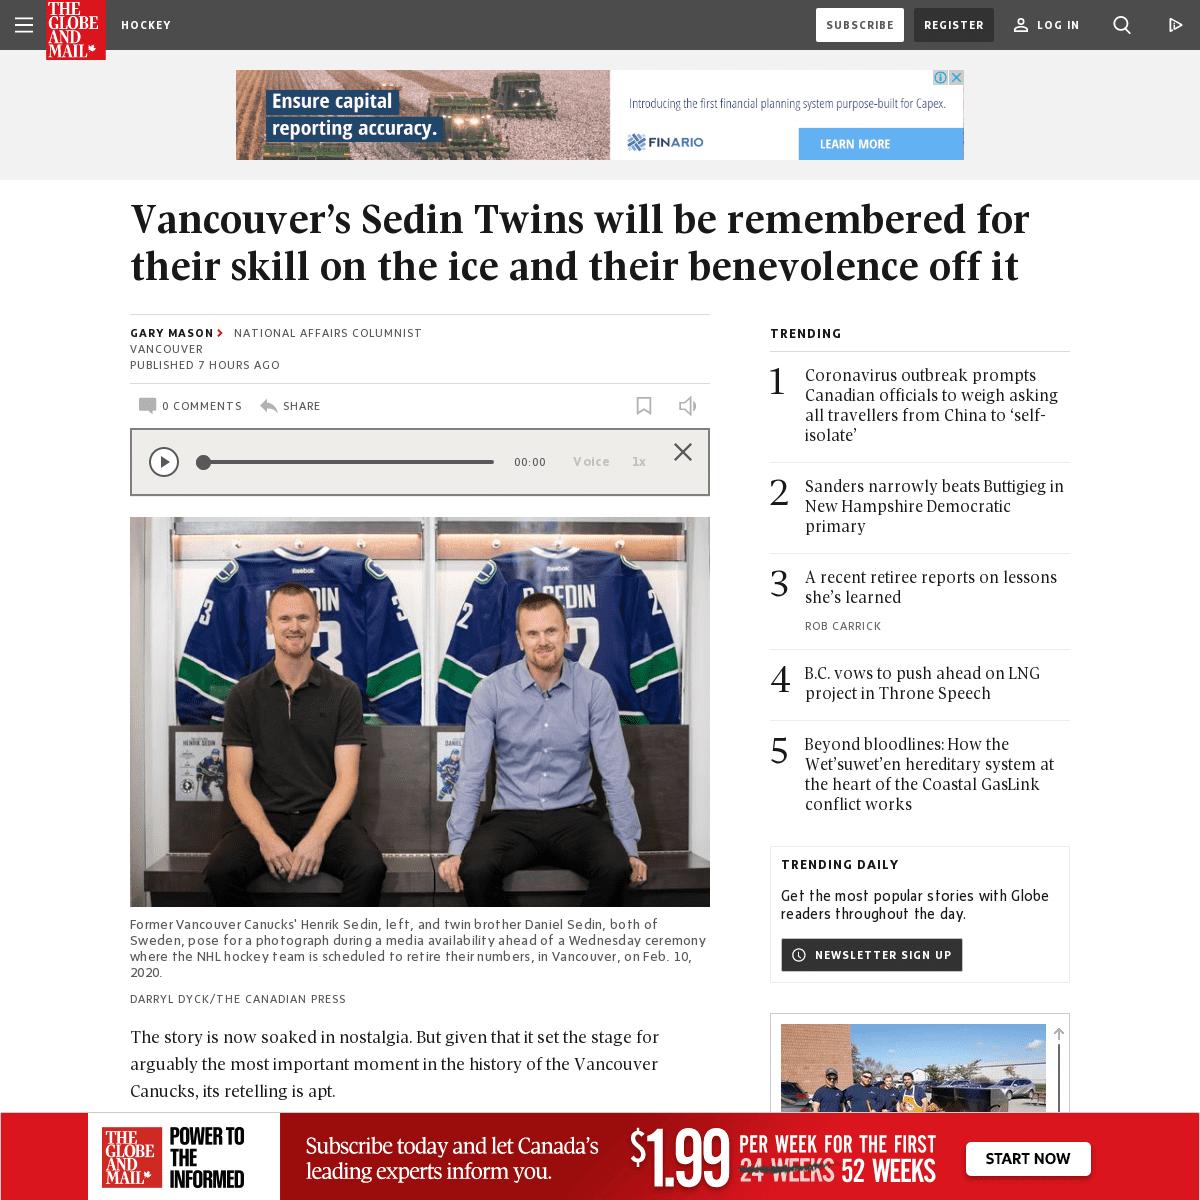 A complete backup of www.theglobeandmail.com/sports/hockey/article-vancouvers-sedin-twins-will-be-remembered-for-their-skill-on-